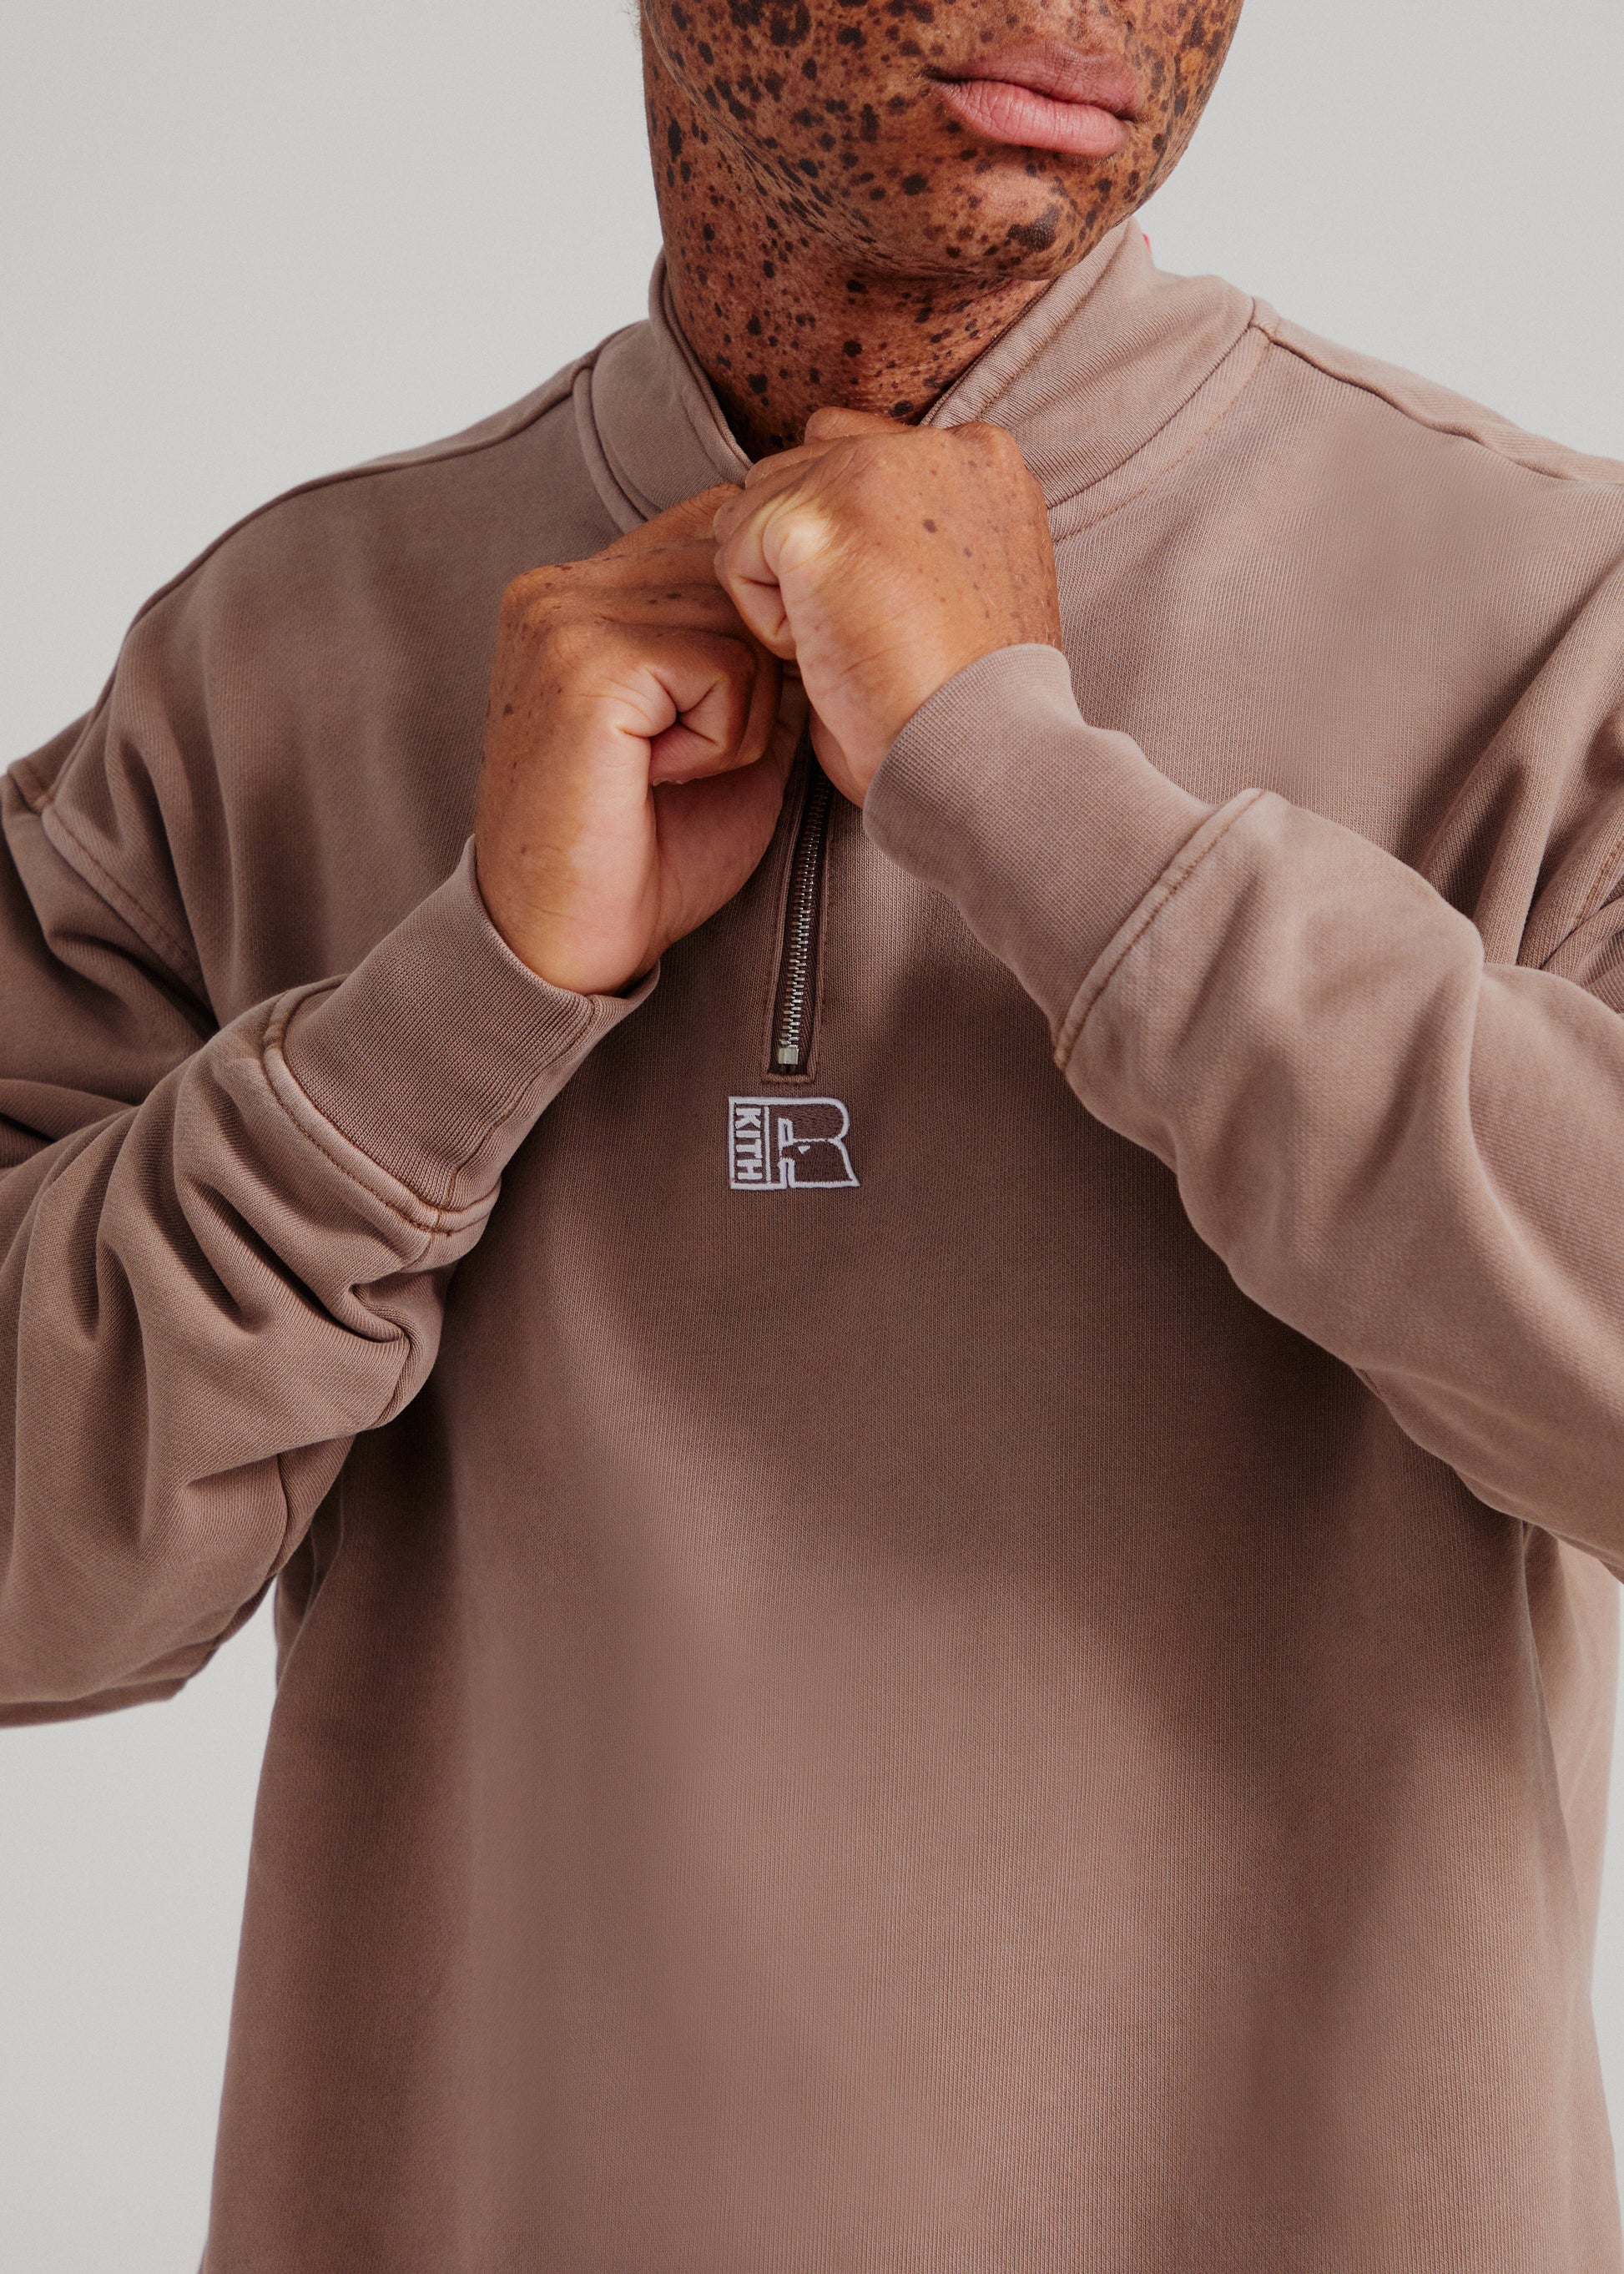 Kith for Russell Athletic - Fall Classics Lookbook